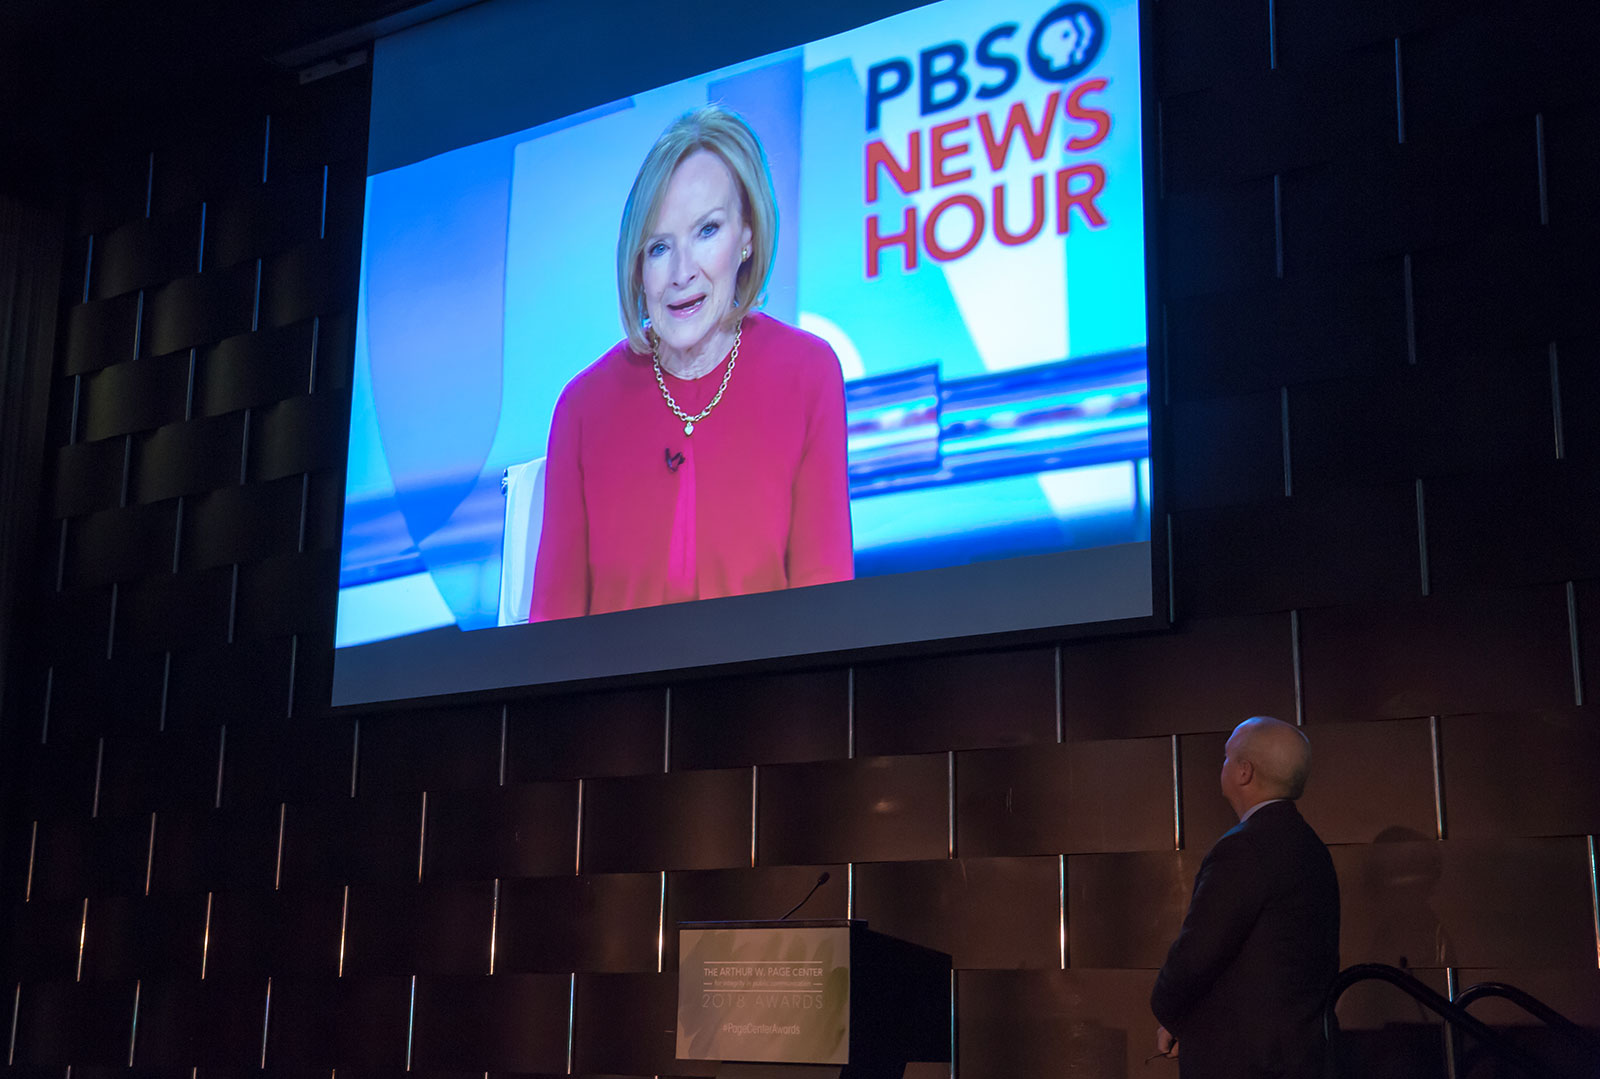 By video, PBS Newshour host Judy Woodruff shares memories of her late friend and colleague Gwen Ifill.